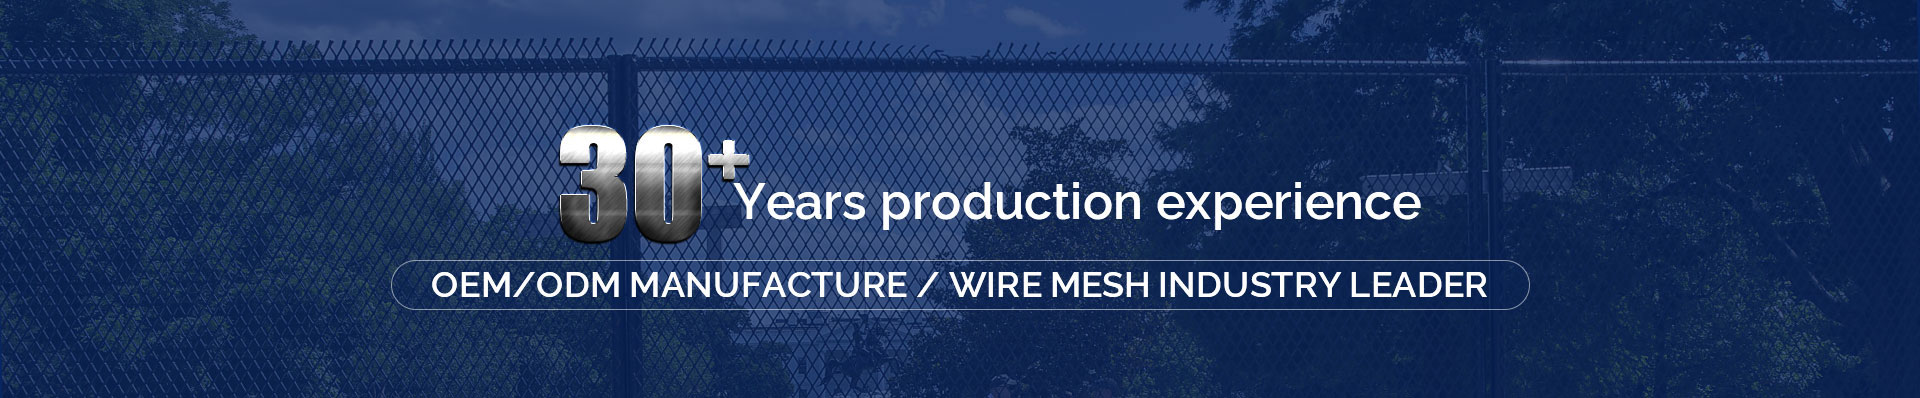 Welded wire fence